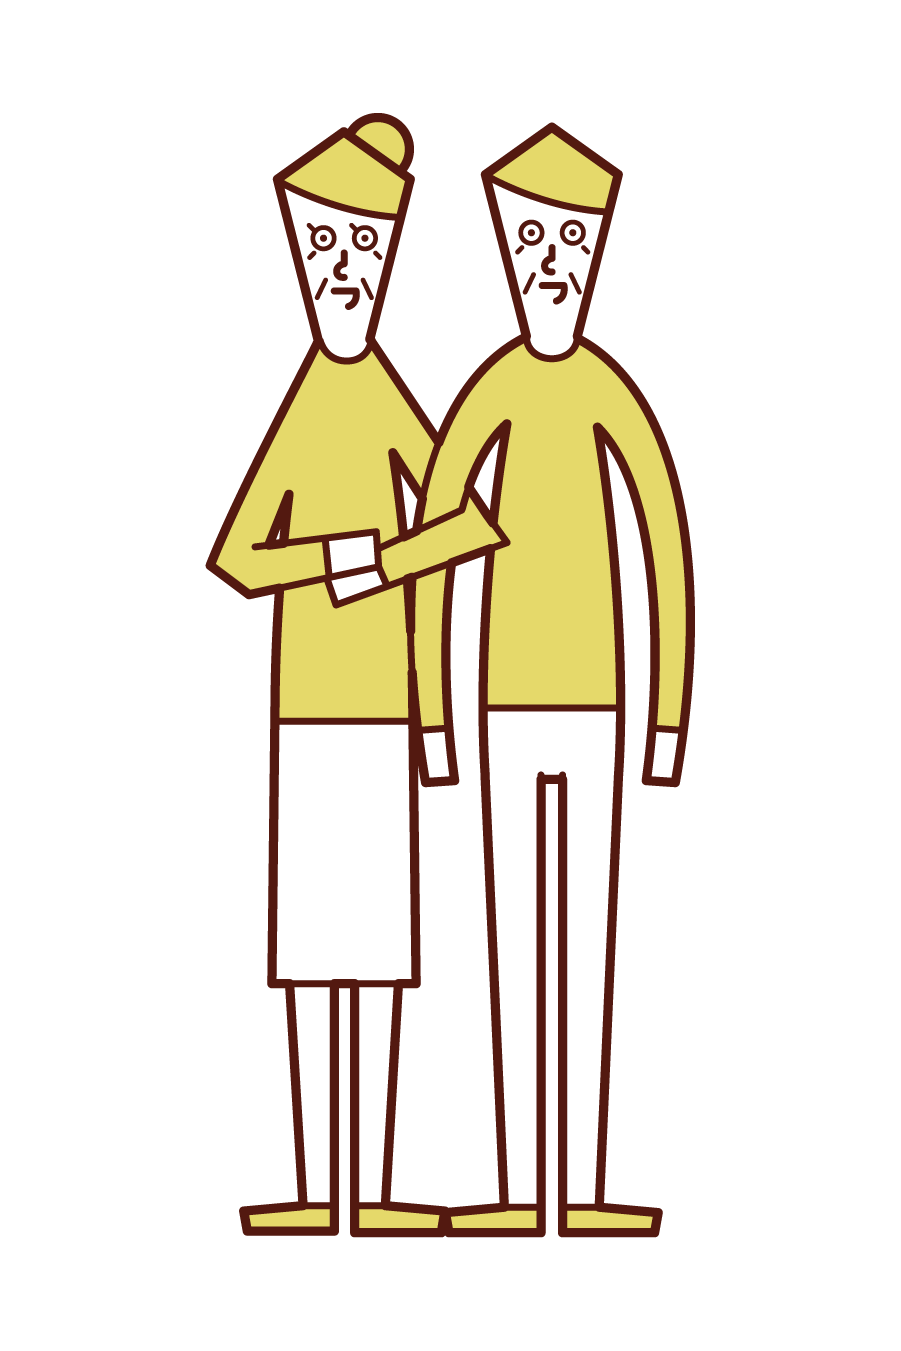 Illustration of an old couple who are good friends